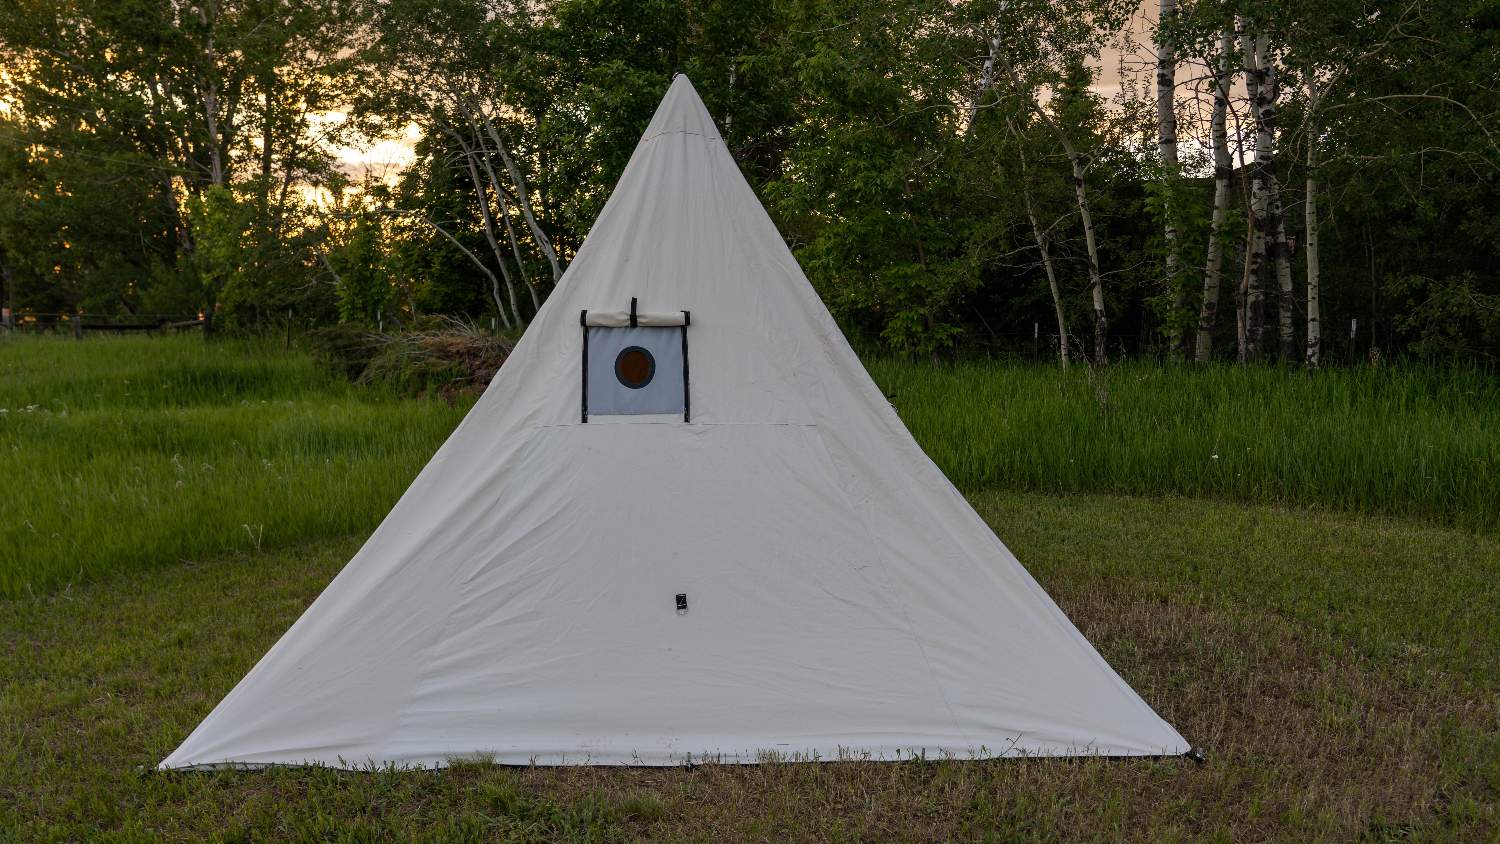 Back Wall of Canvas Range Tent Showing Stove Jack